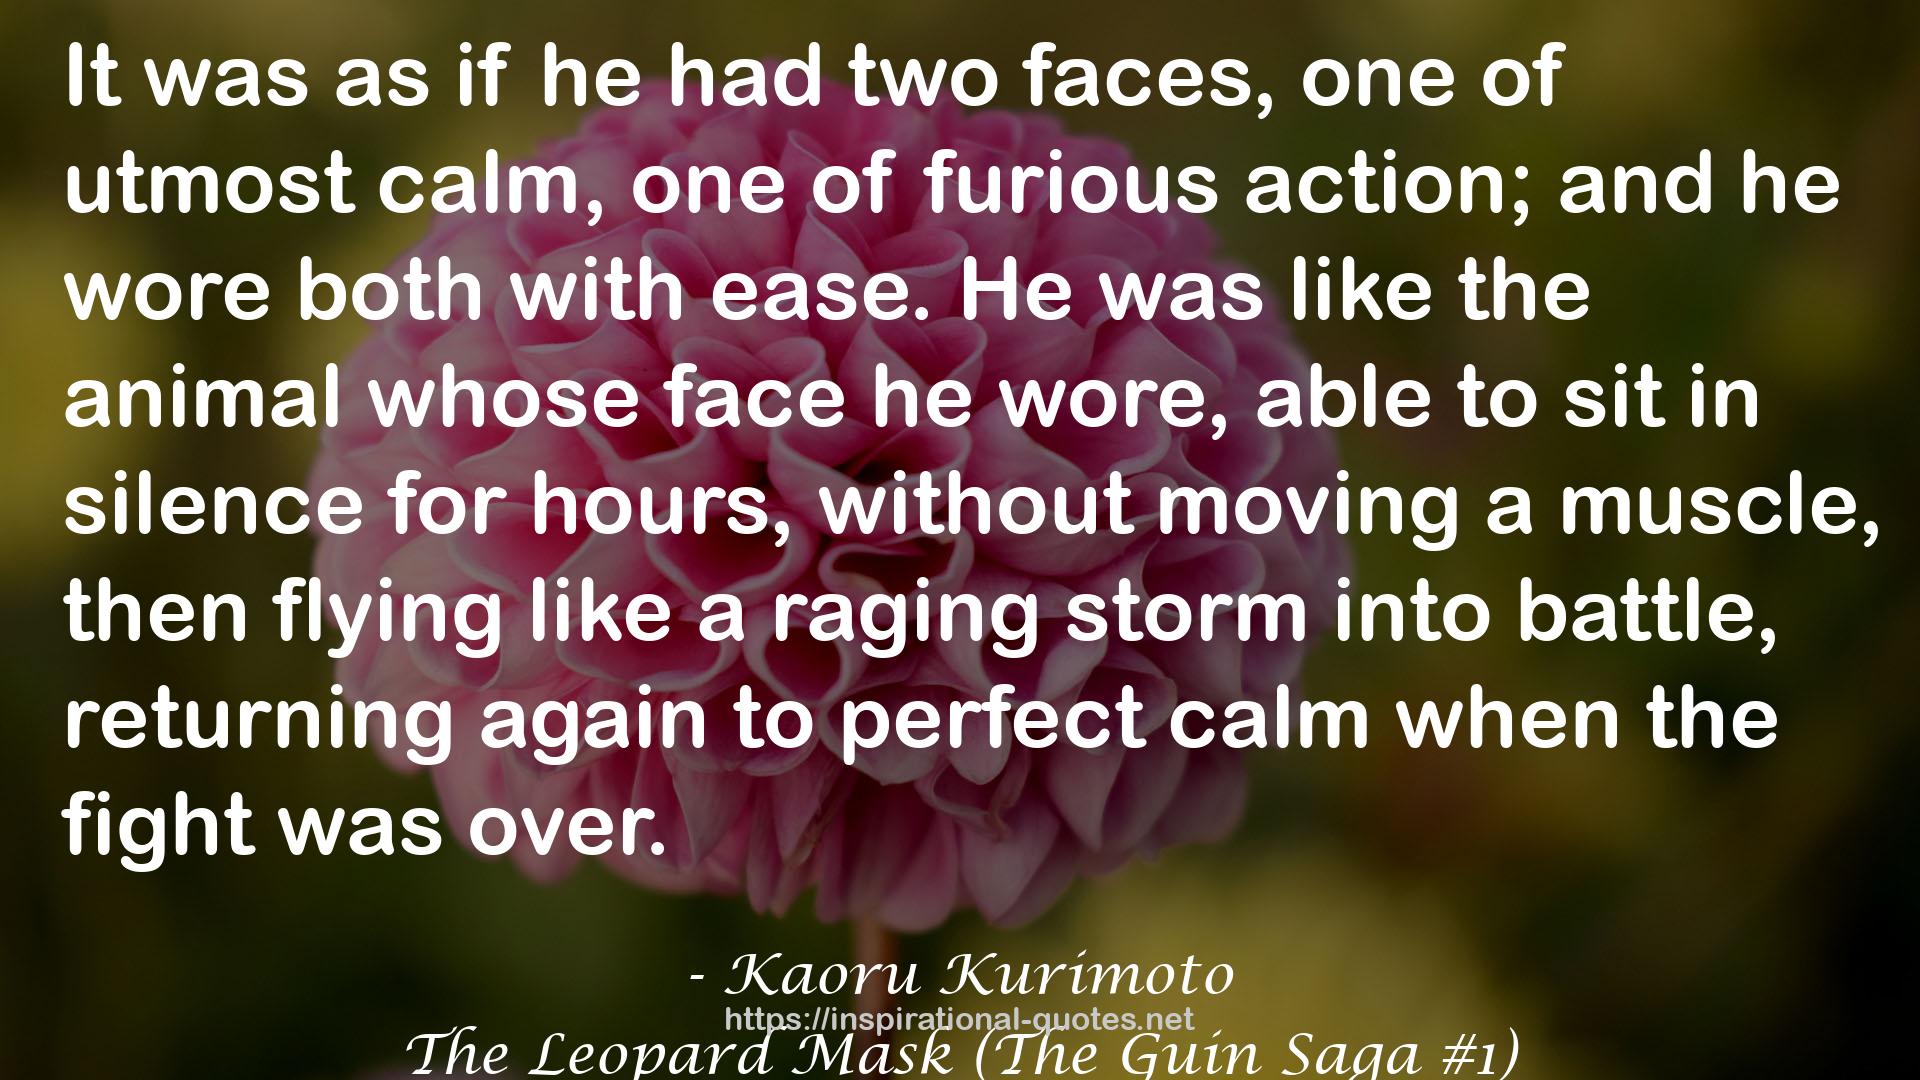 The Leopard Mask (The Guin Saga #1) QUOTES